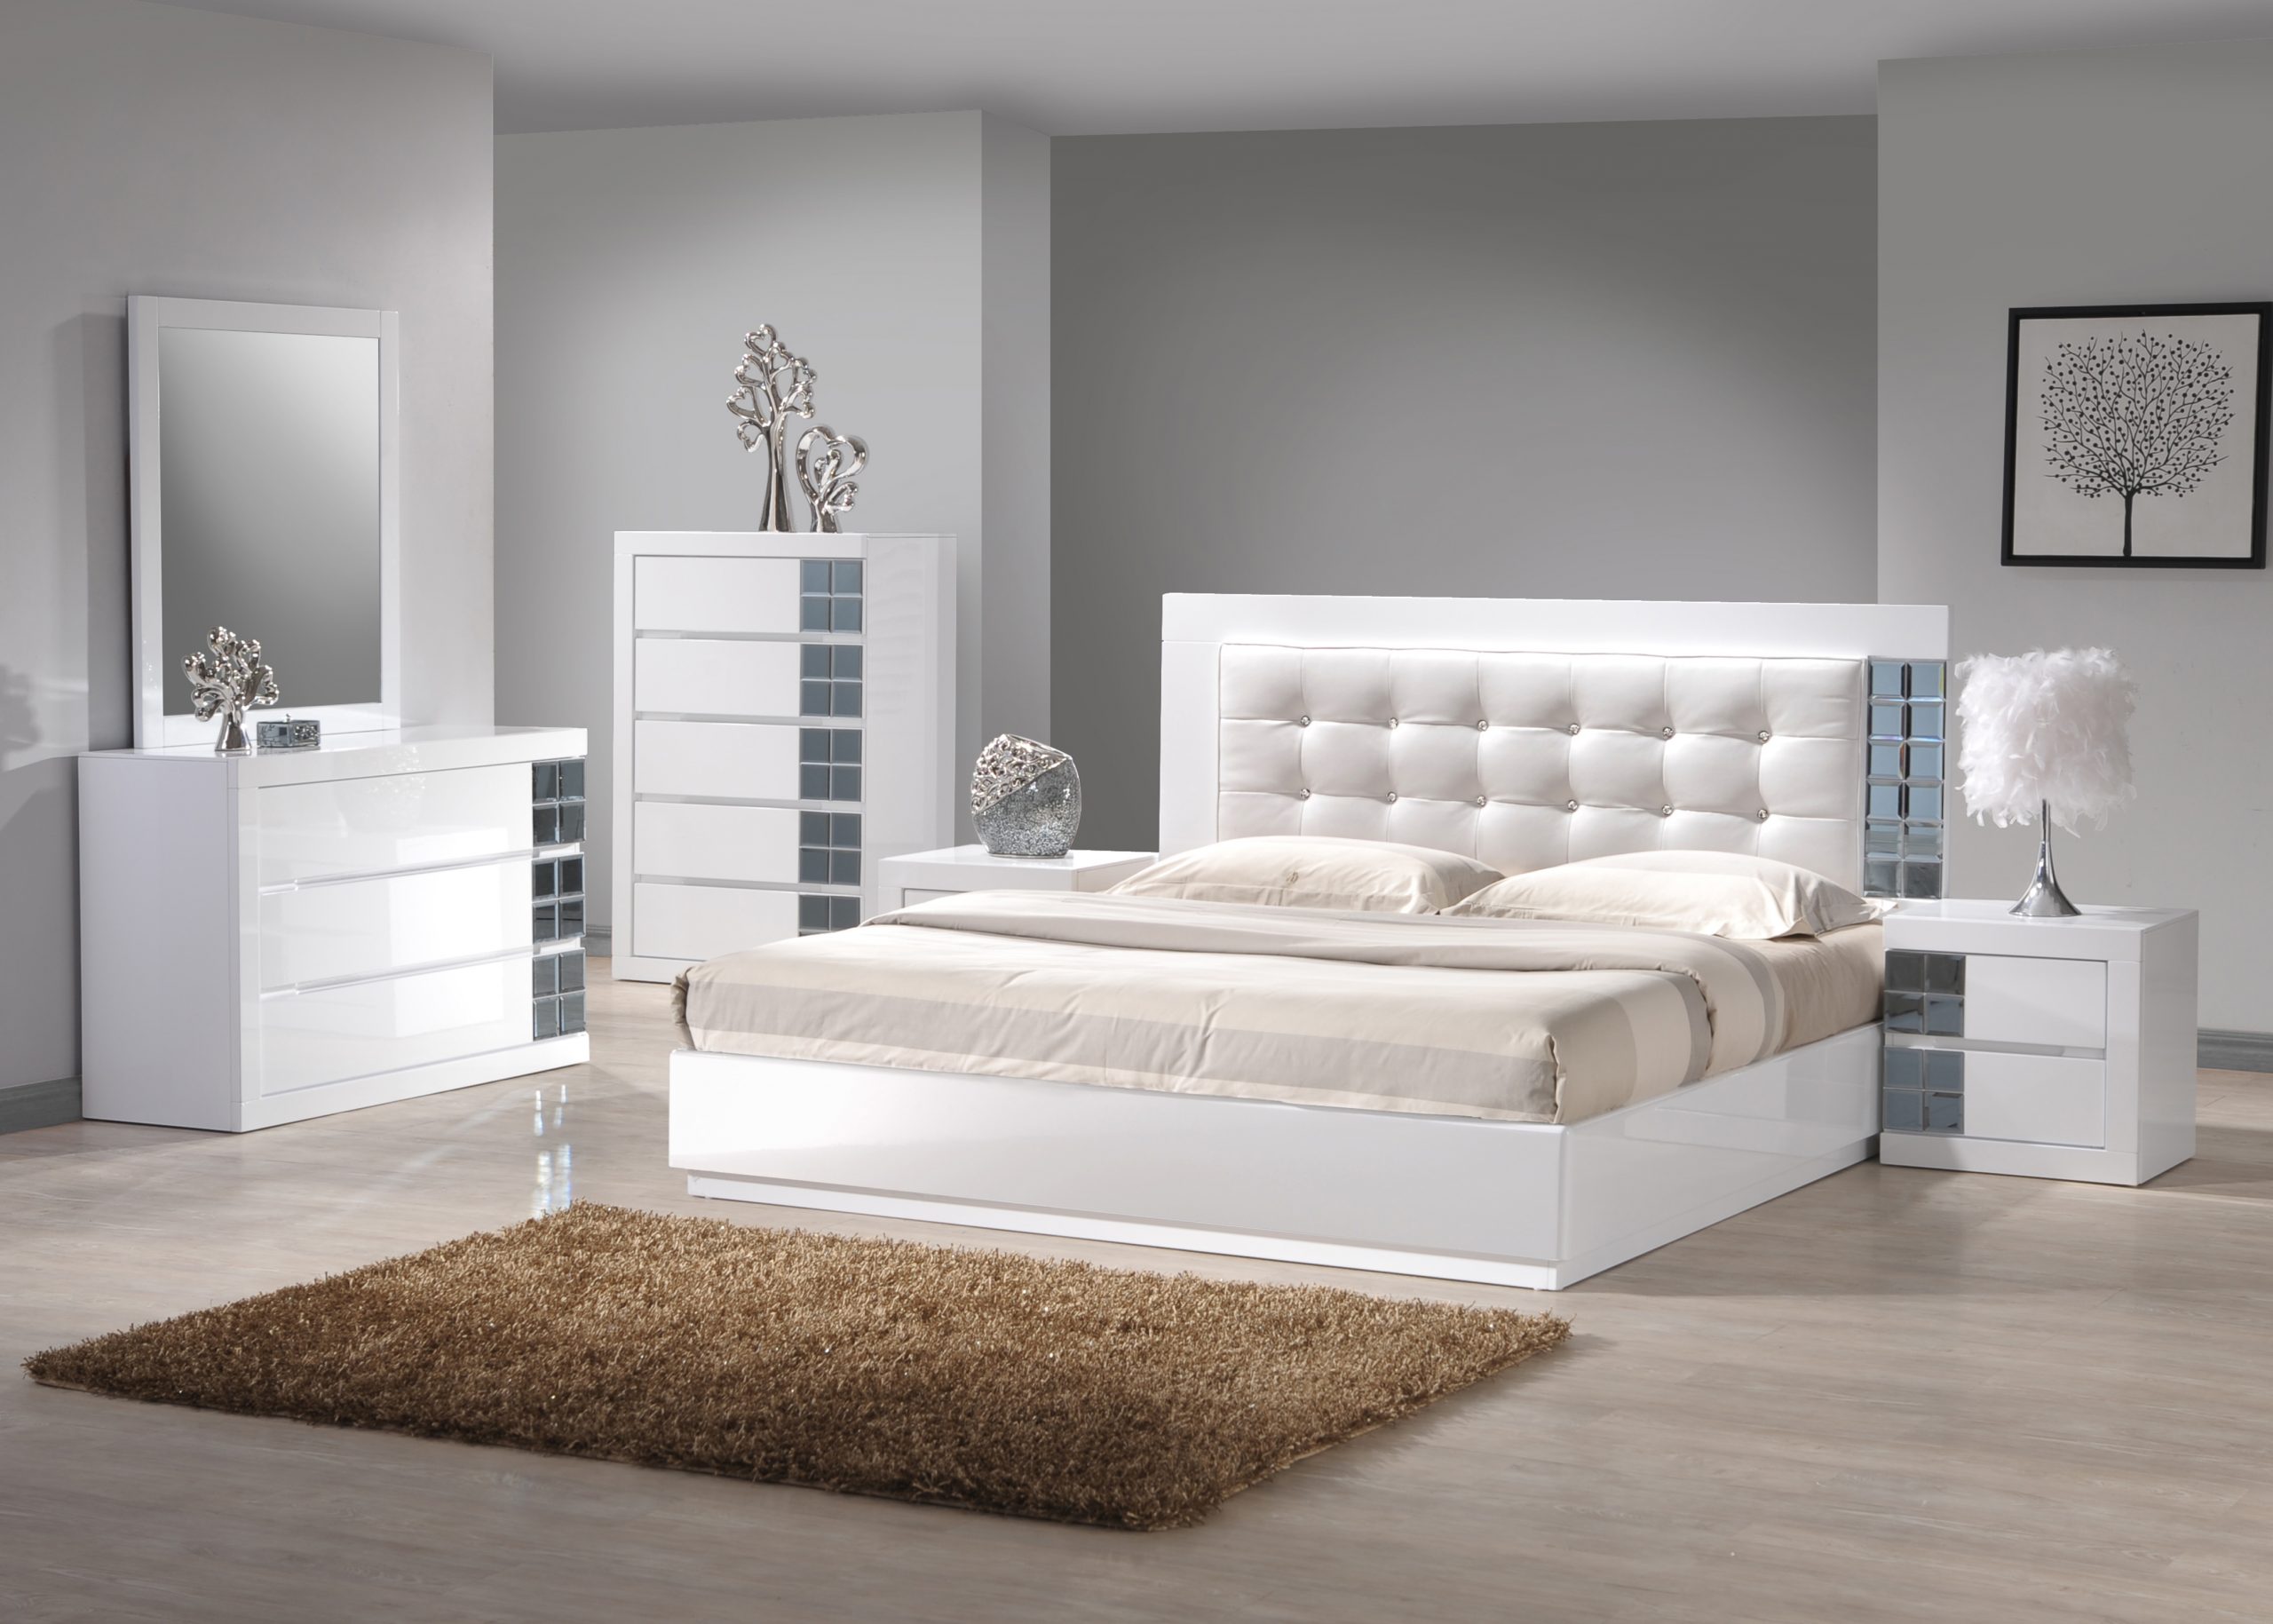 White And Mulberry Bedroom Decor